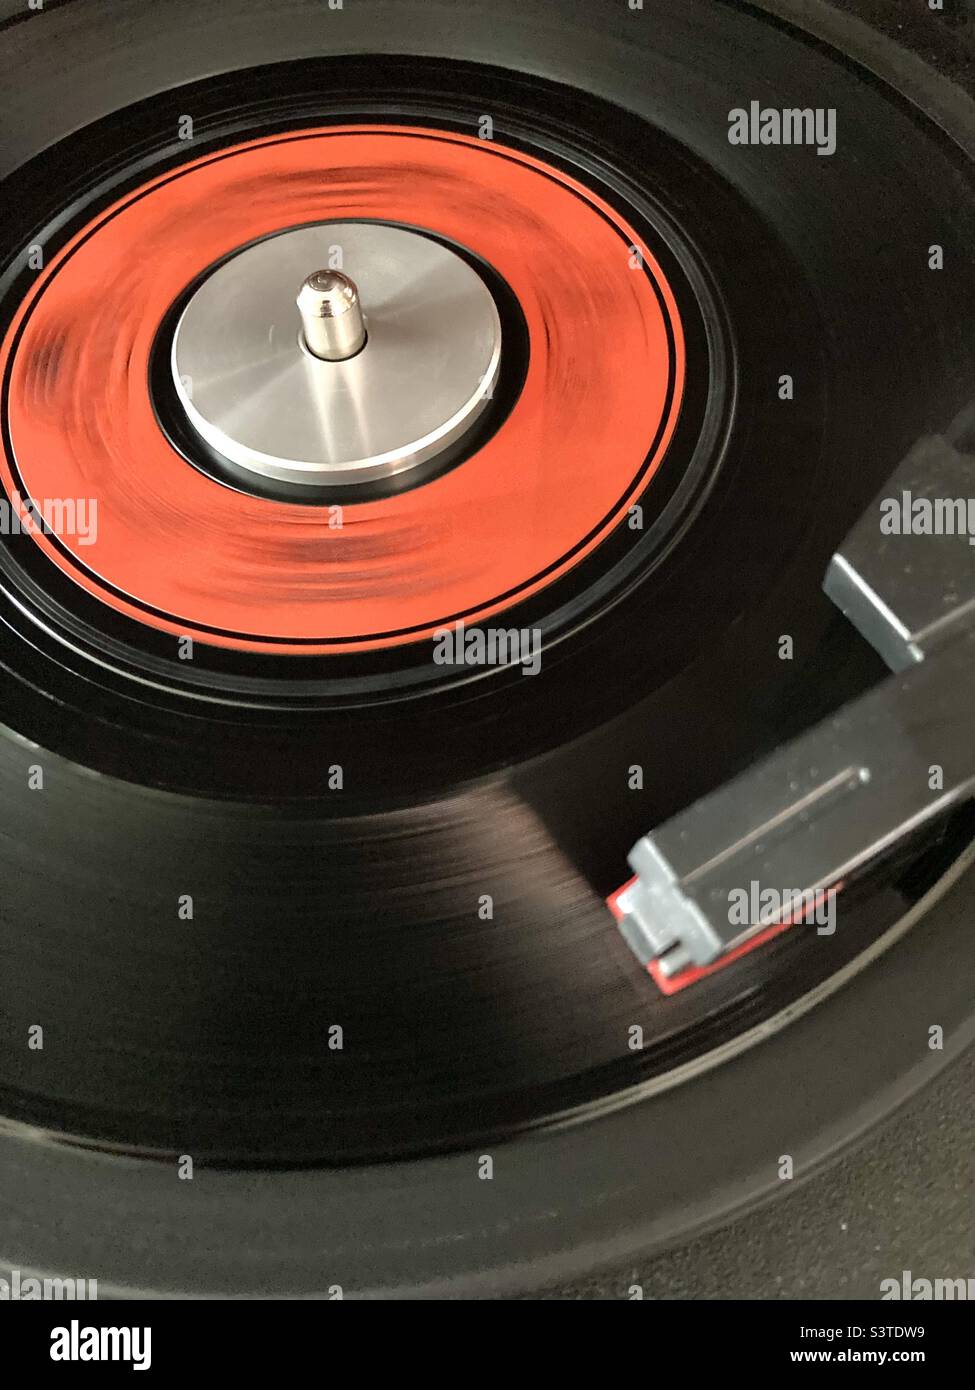 Vinyl record spinning on a turntable Stock Photo